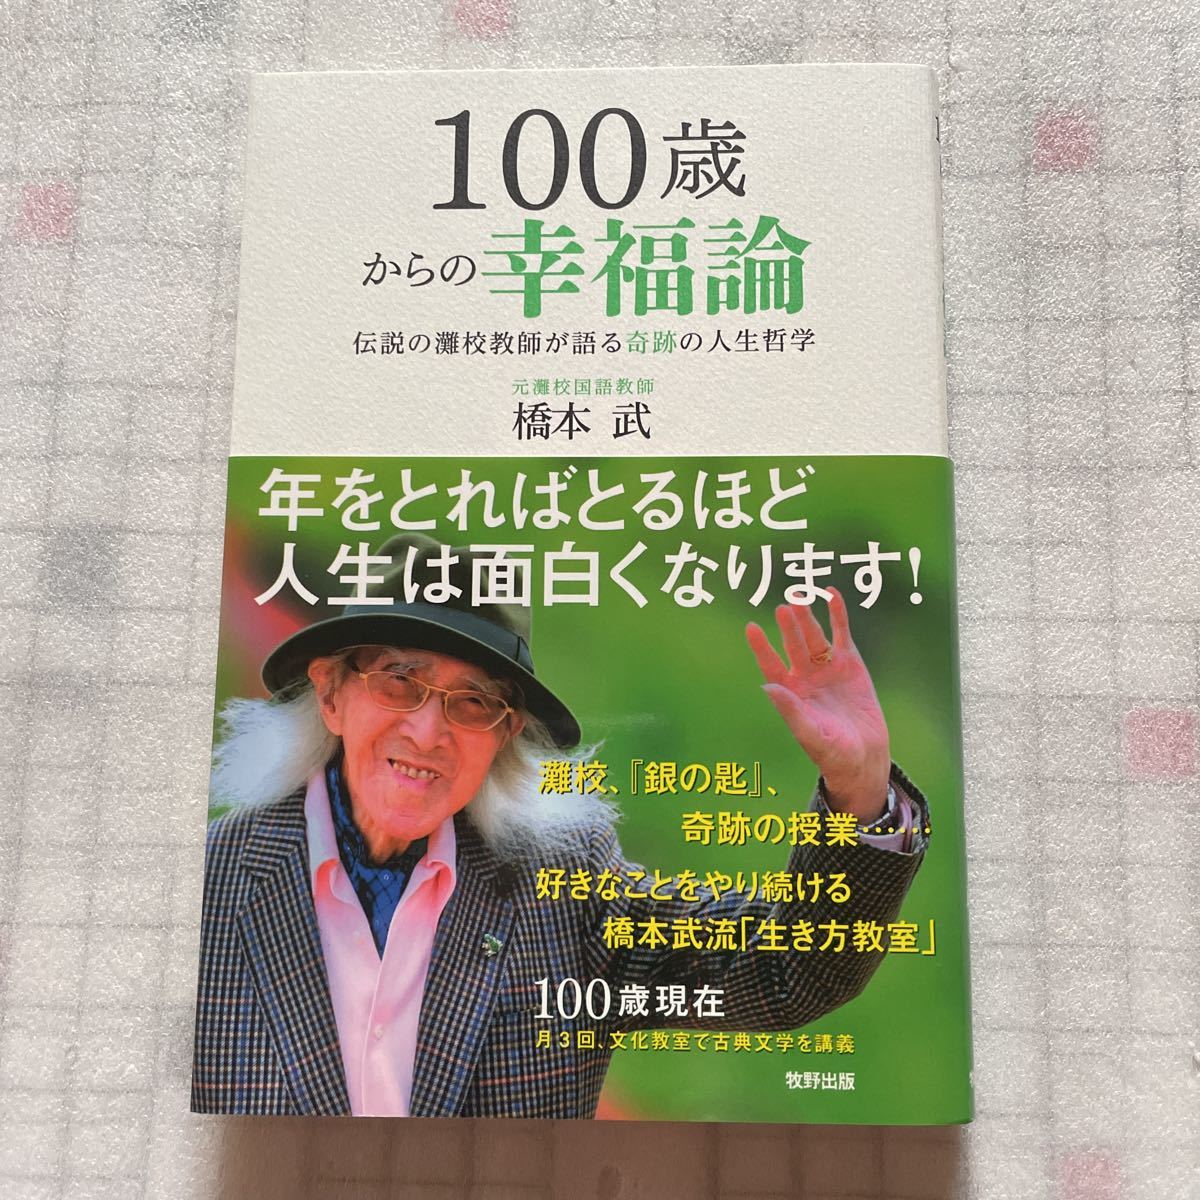 100 -years old from . luck theory Hashimoto ... publish 